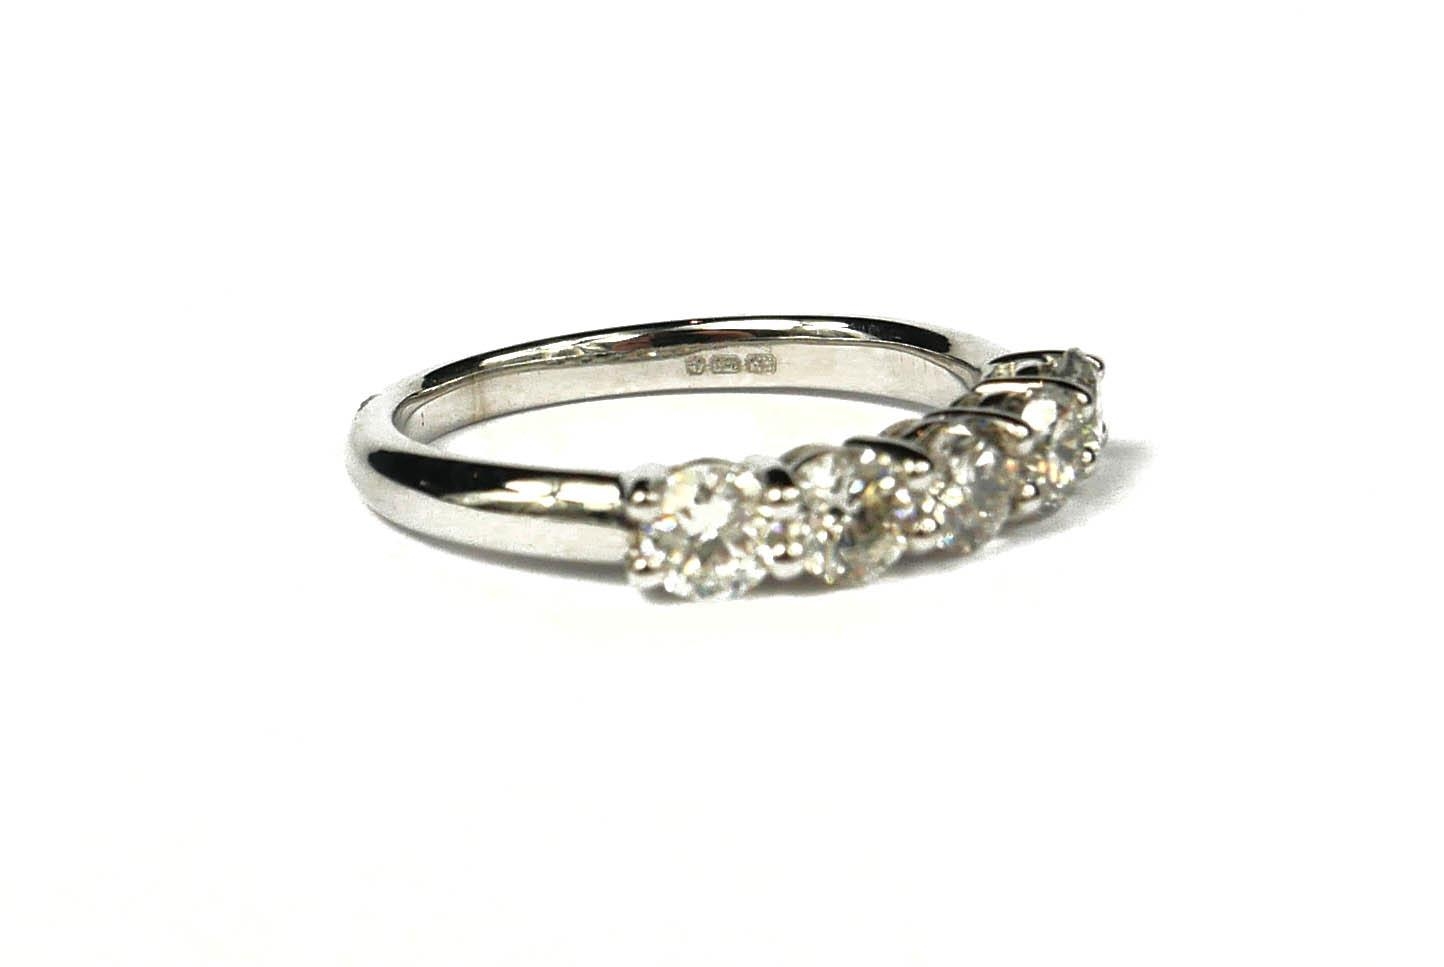 AN 18CT WHITE GOLD FIVE STONE DIAMOND RING. (Approx diamonds 1.09ct) - Image 2 of 2